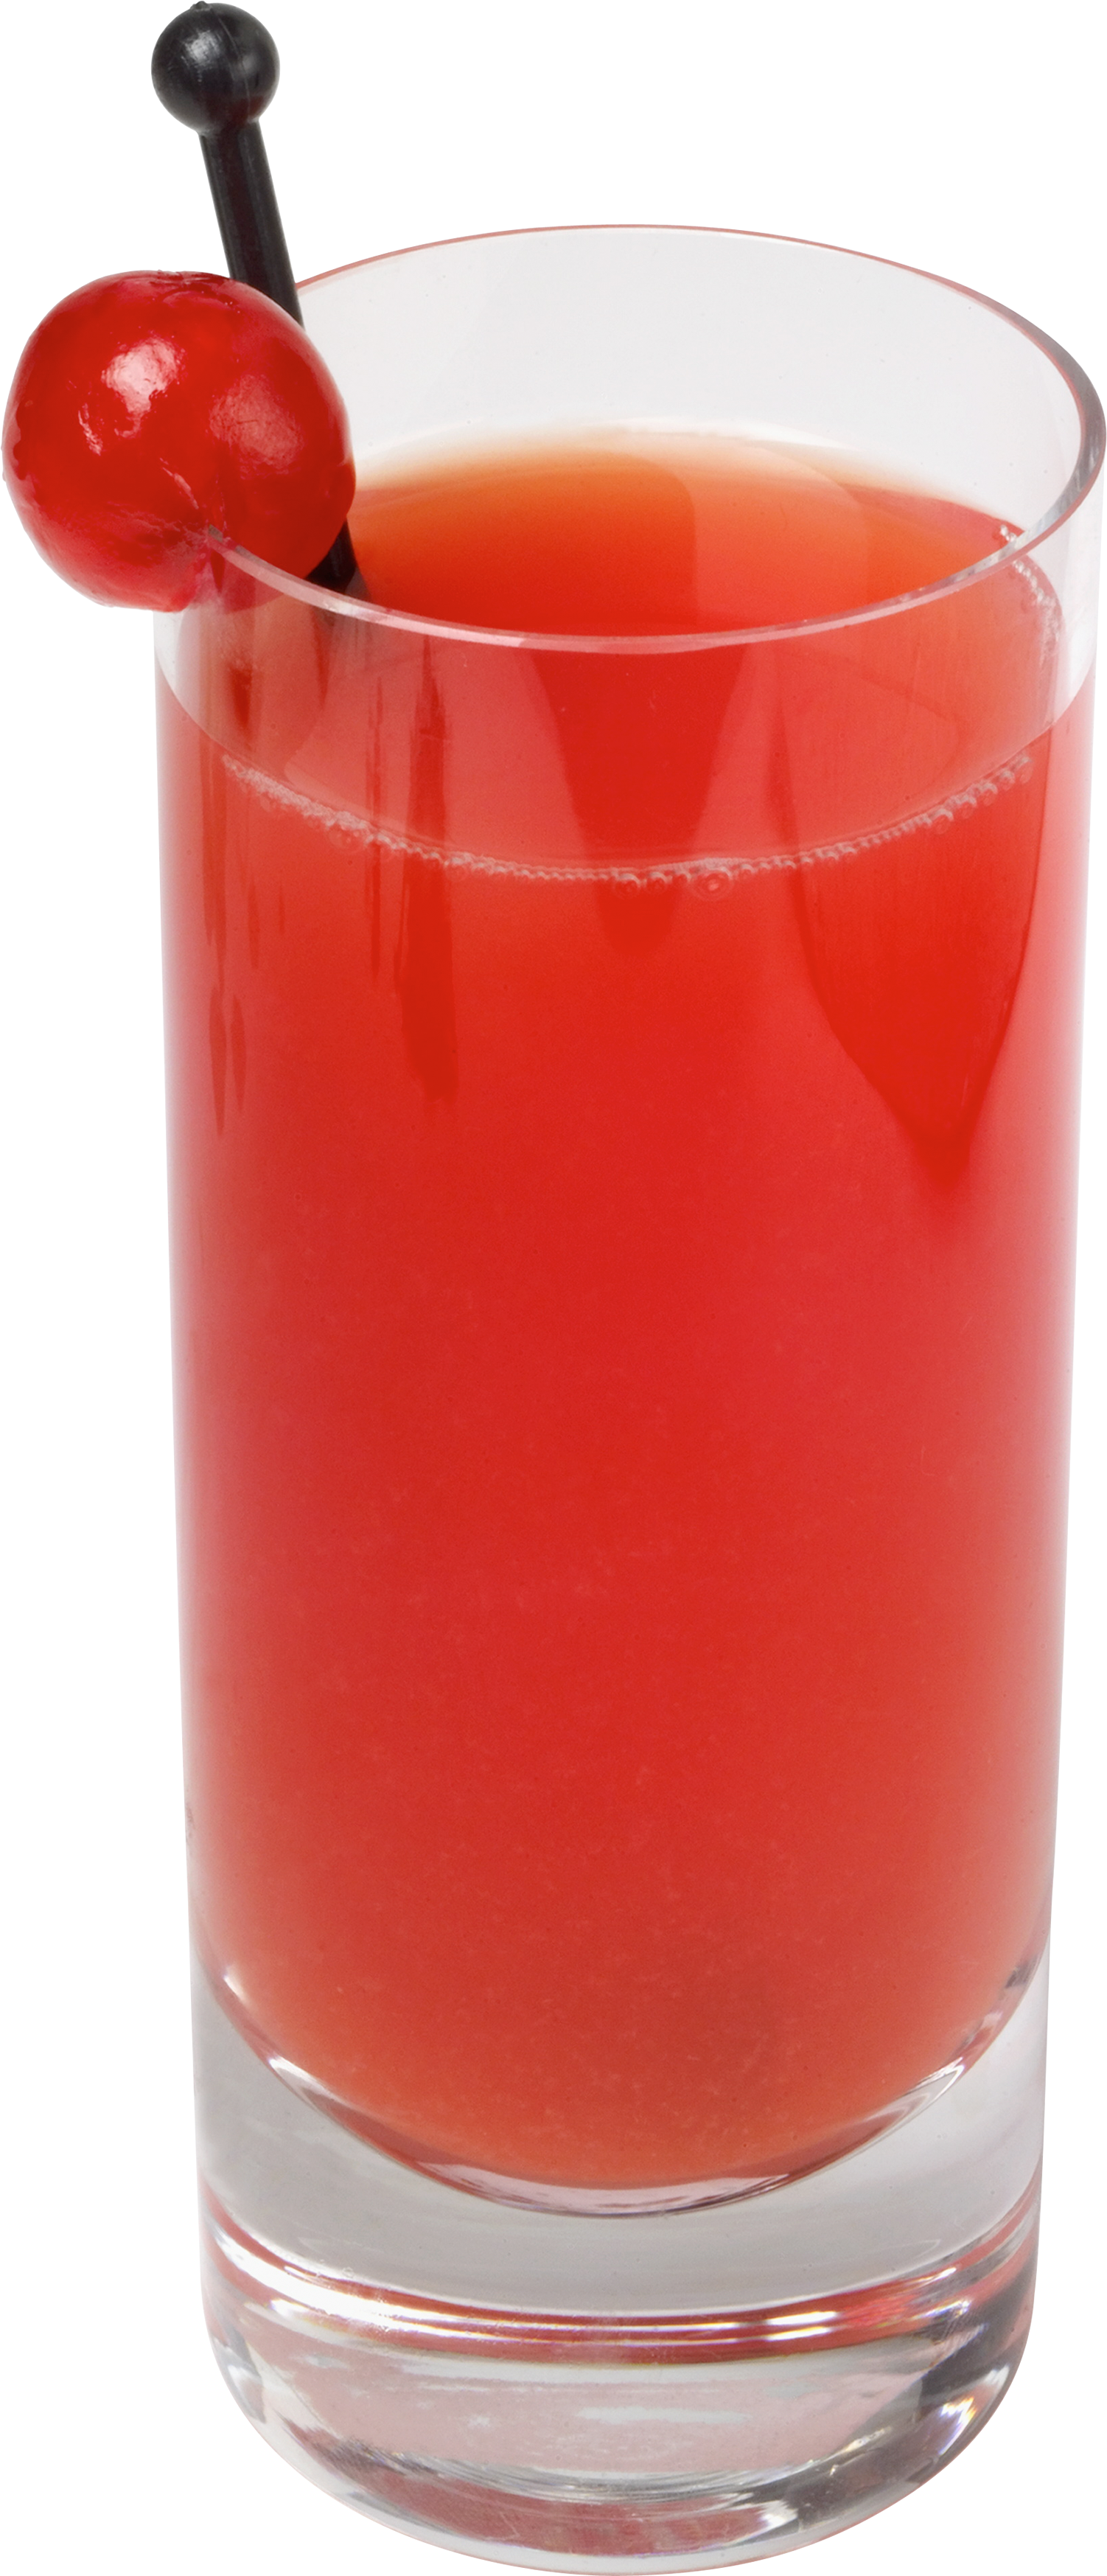 Red Juice PNG image